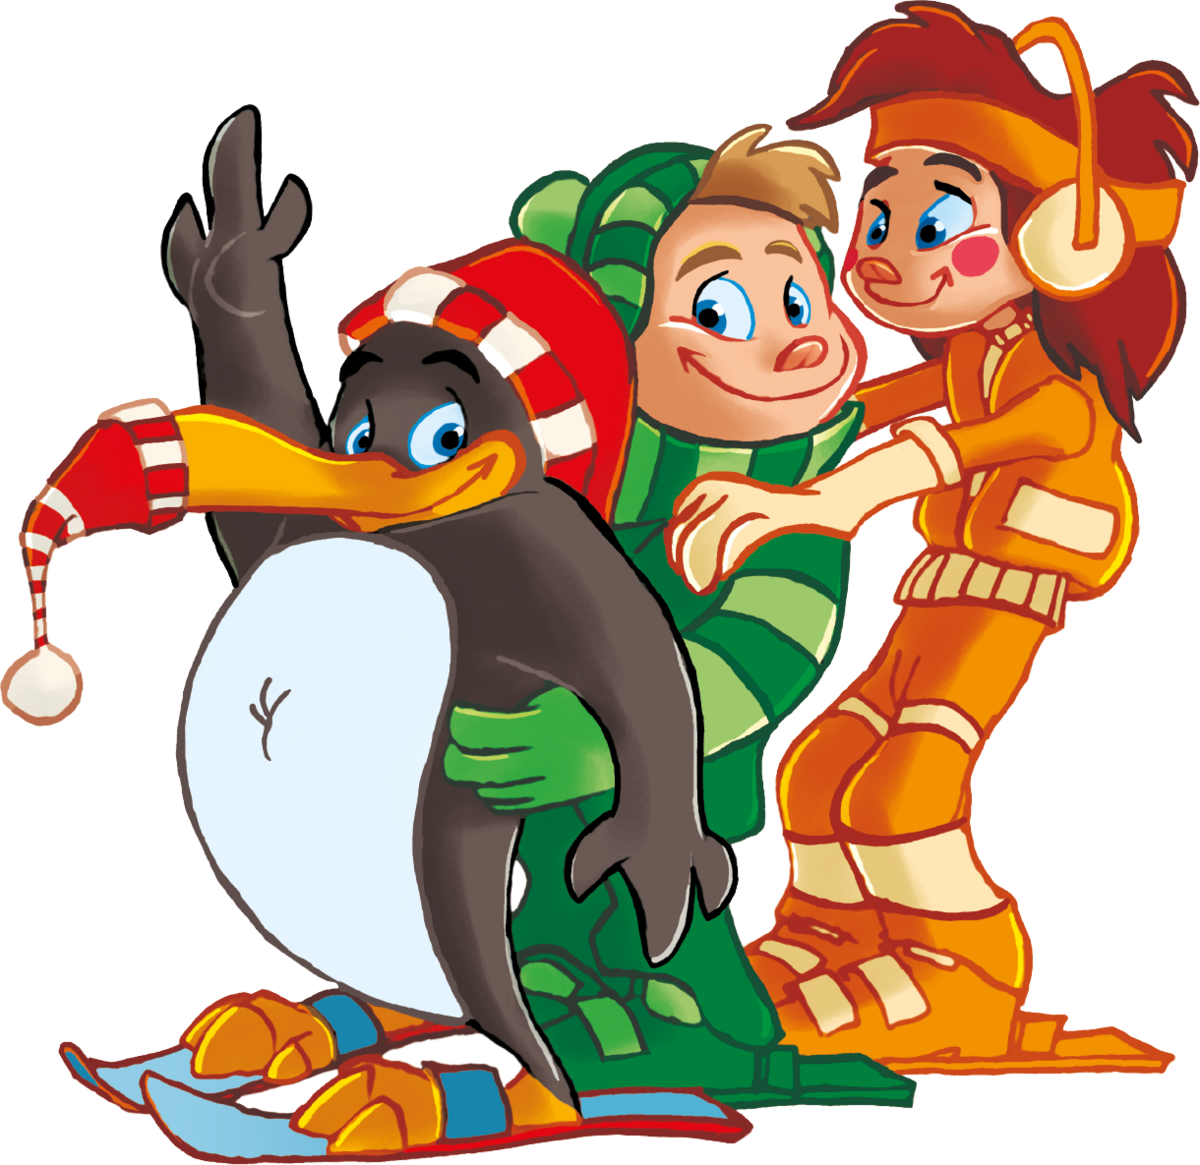 Illustration of BOBO the penguin with friends in a piste snake